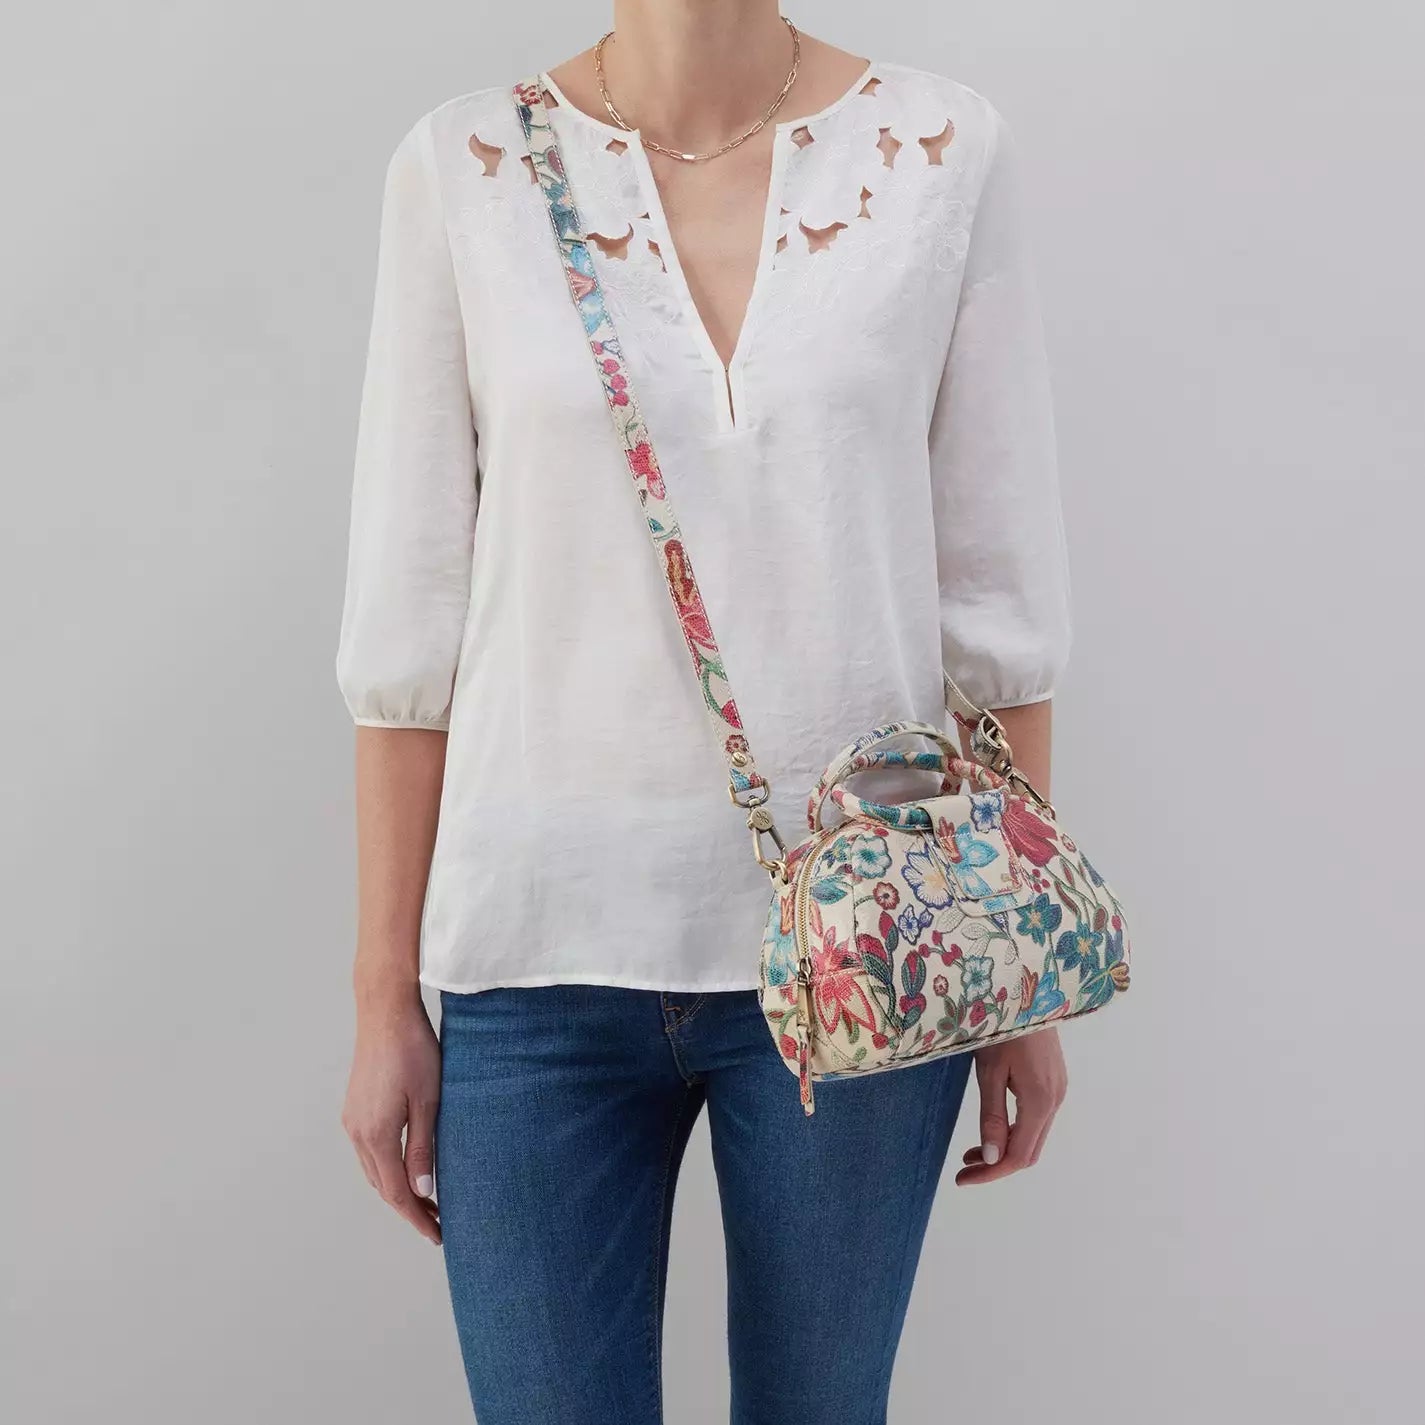 HOBO 'LIMITED EDITION' SHEILA SMALL SATCHEL | FLORAL